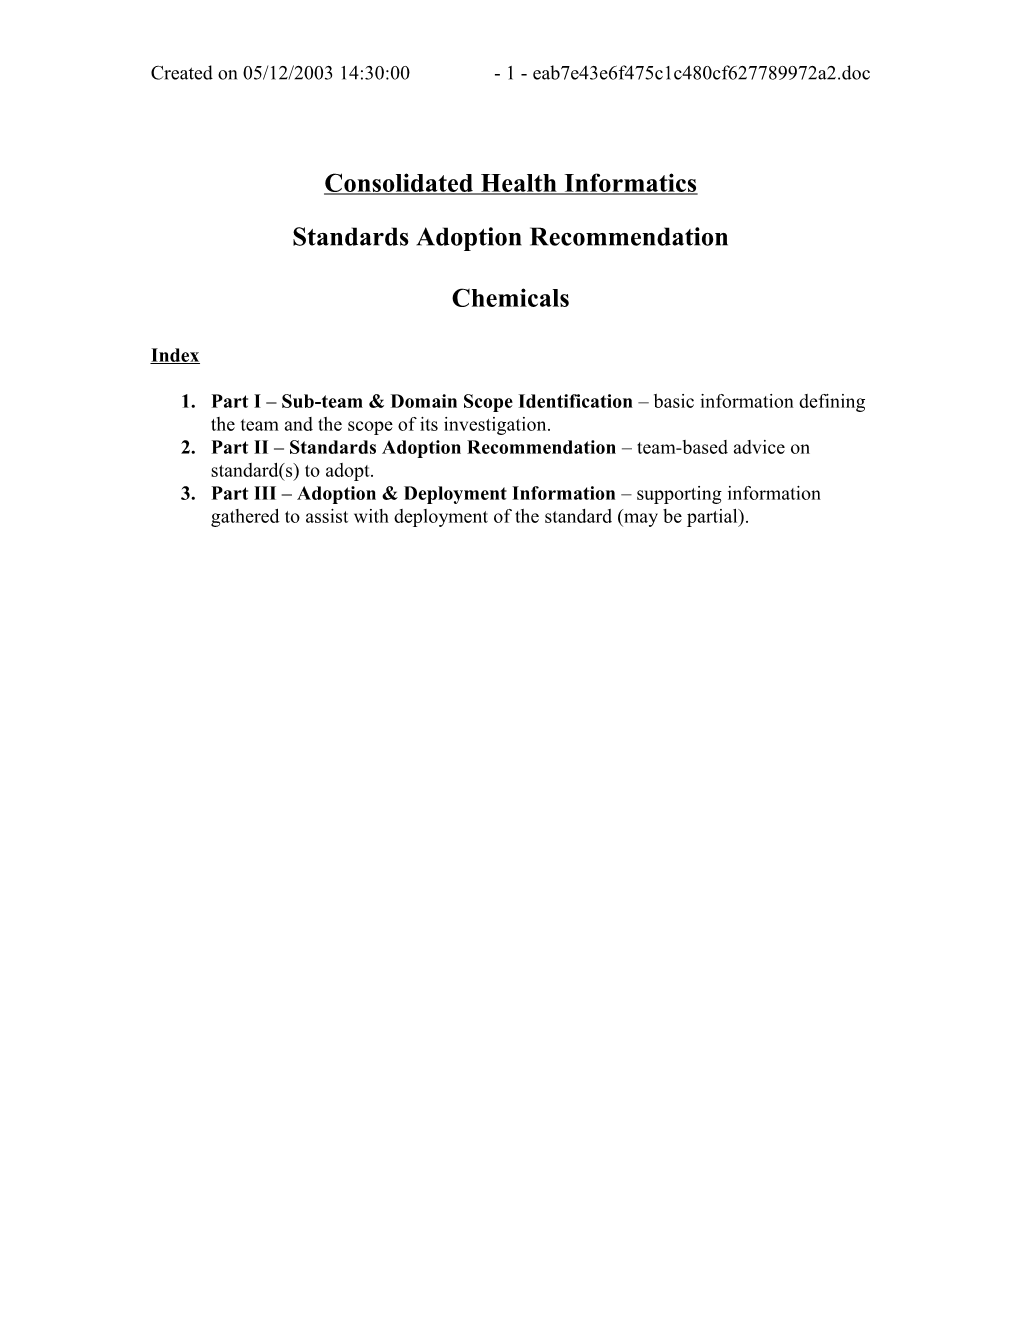 Consolidated Health Care Informatics